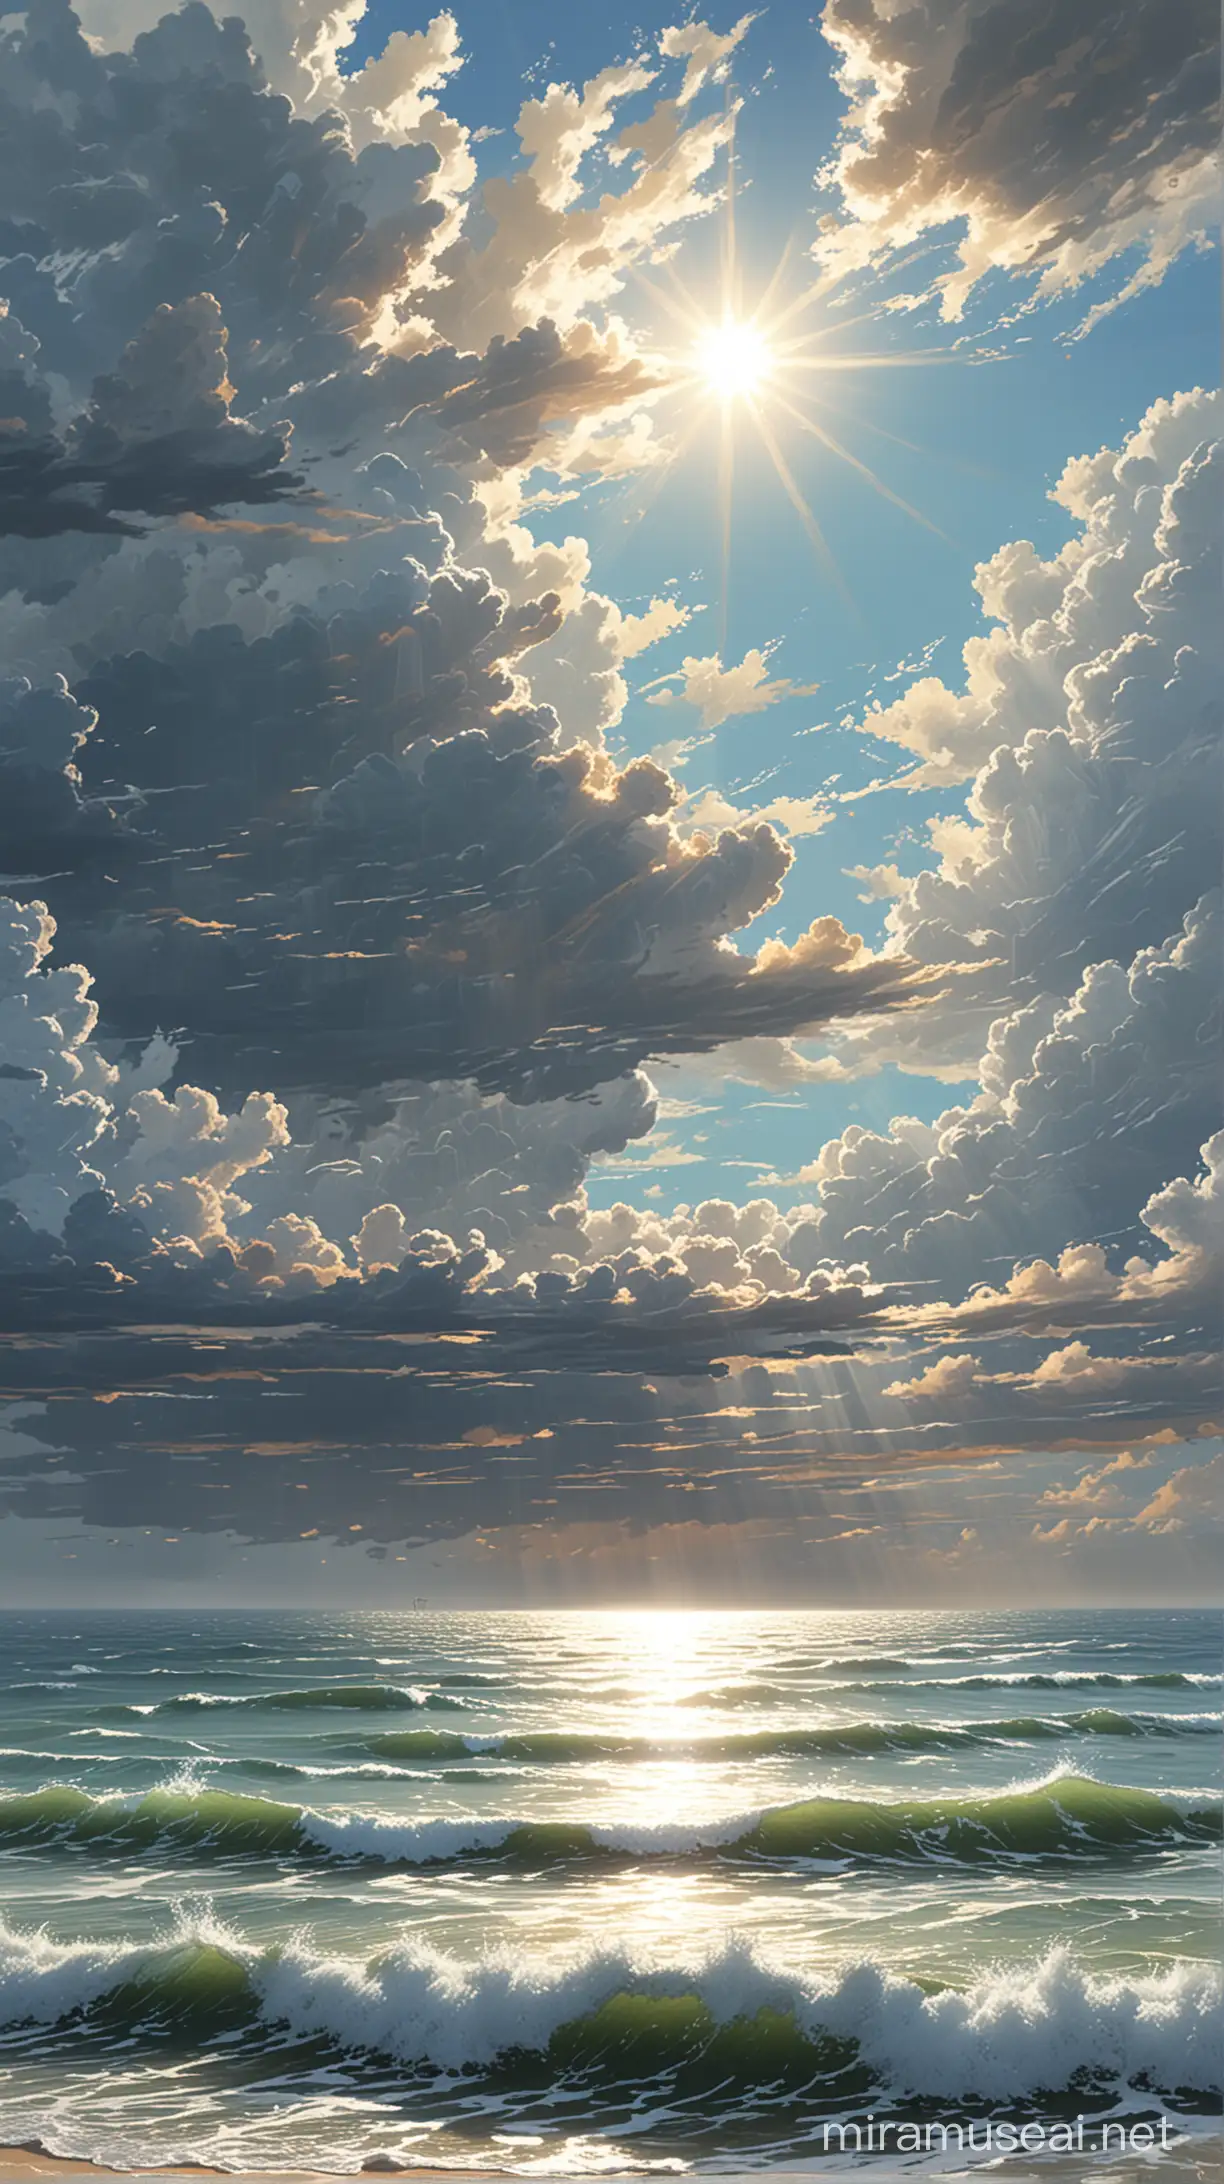 Mystical Oceanfront Illustration Sunlit Waves and Detailed Clouds in Makoto Shinkai Style